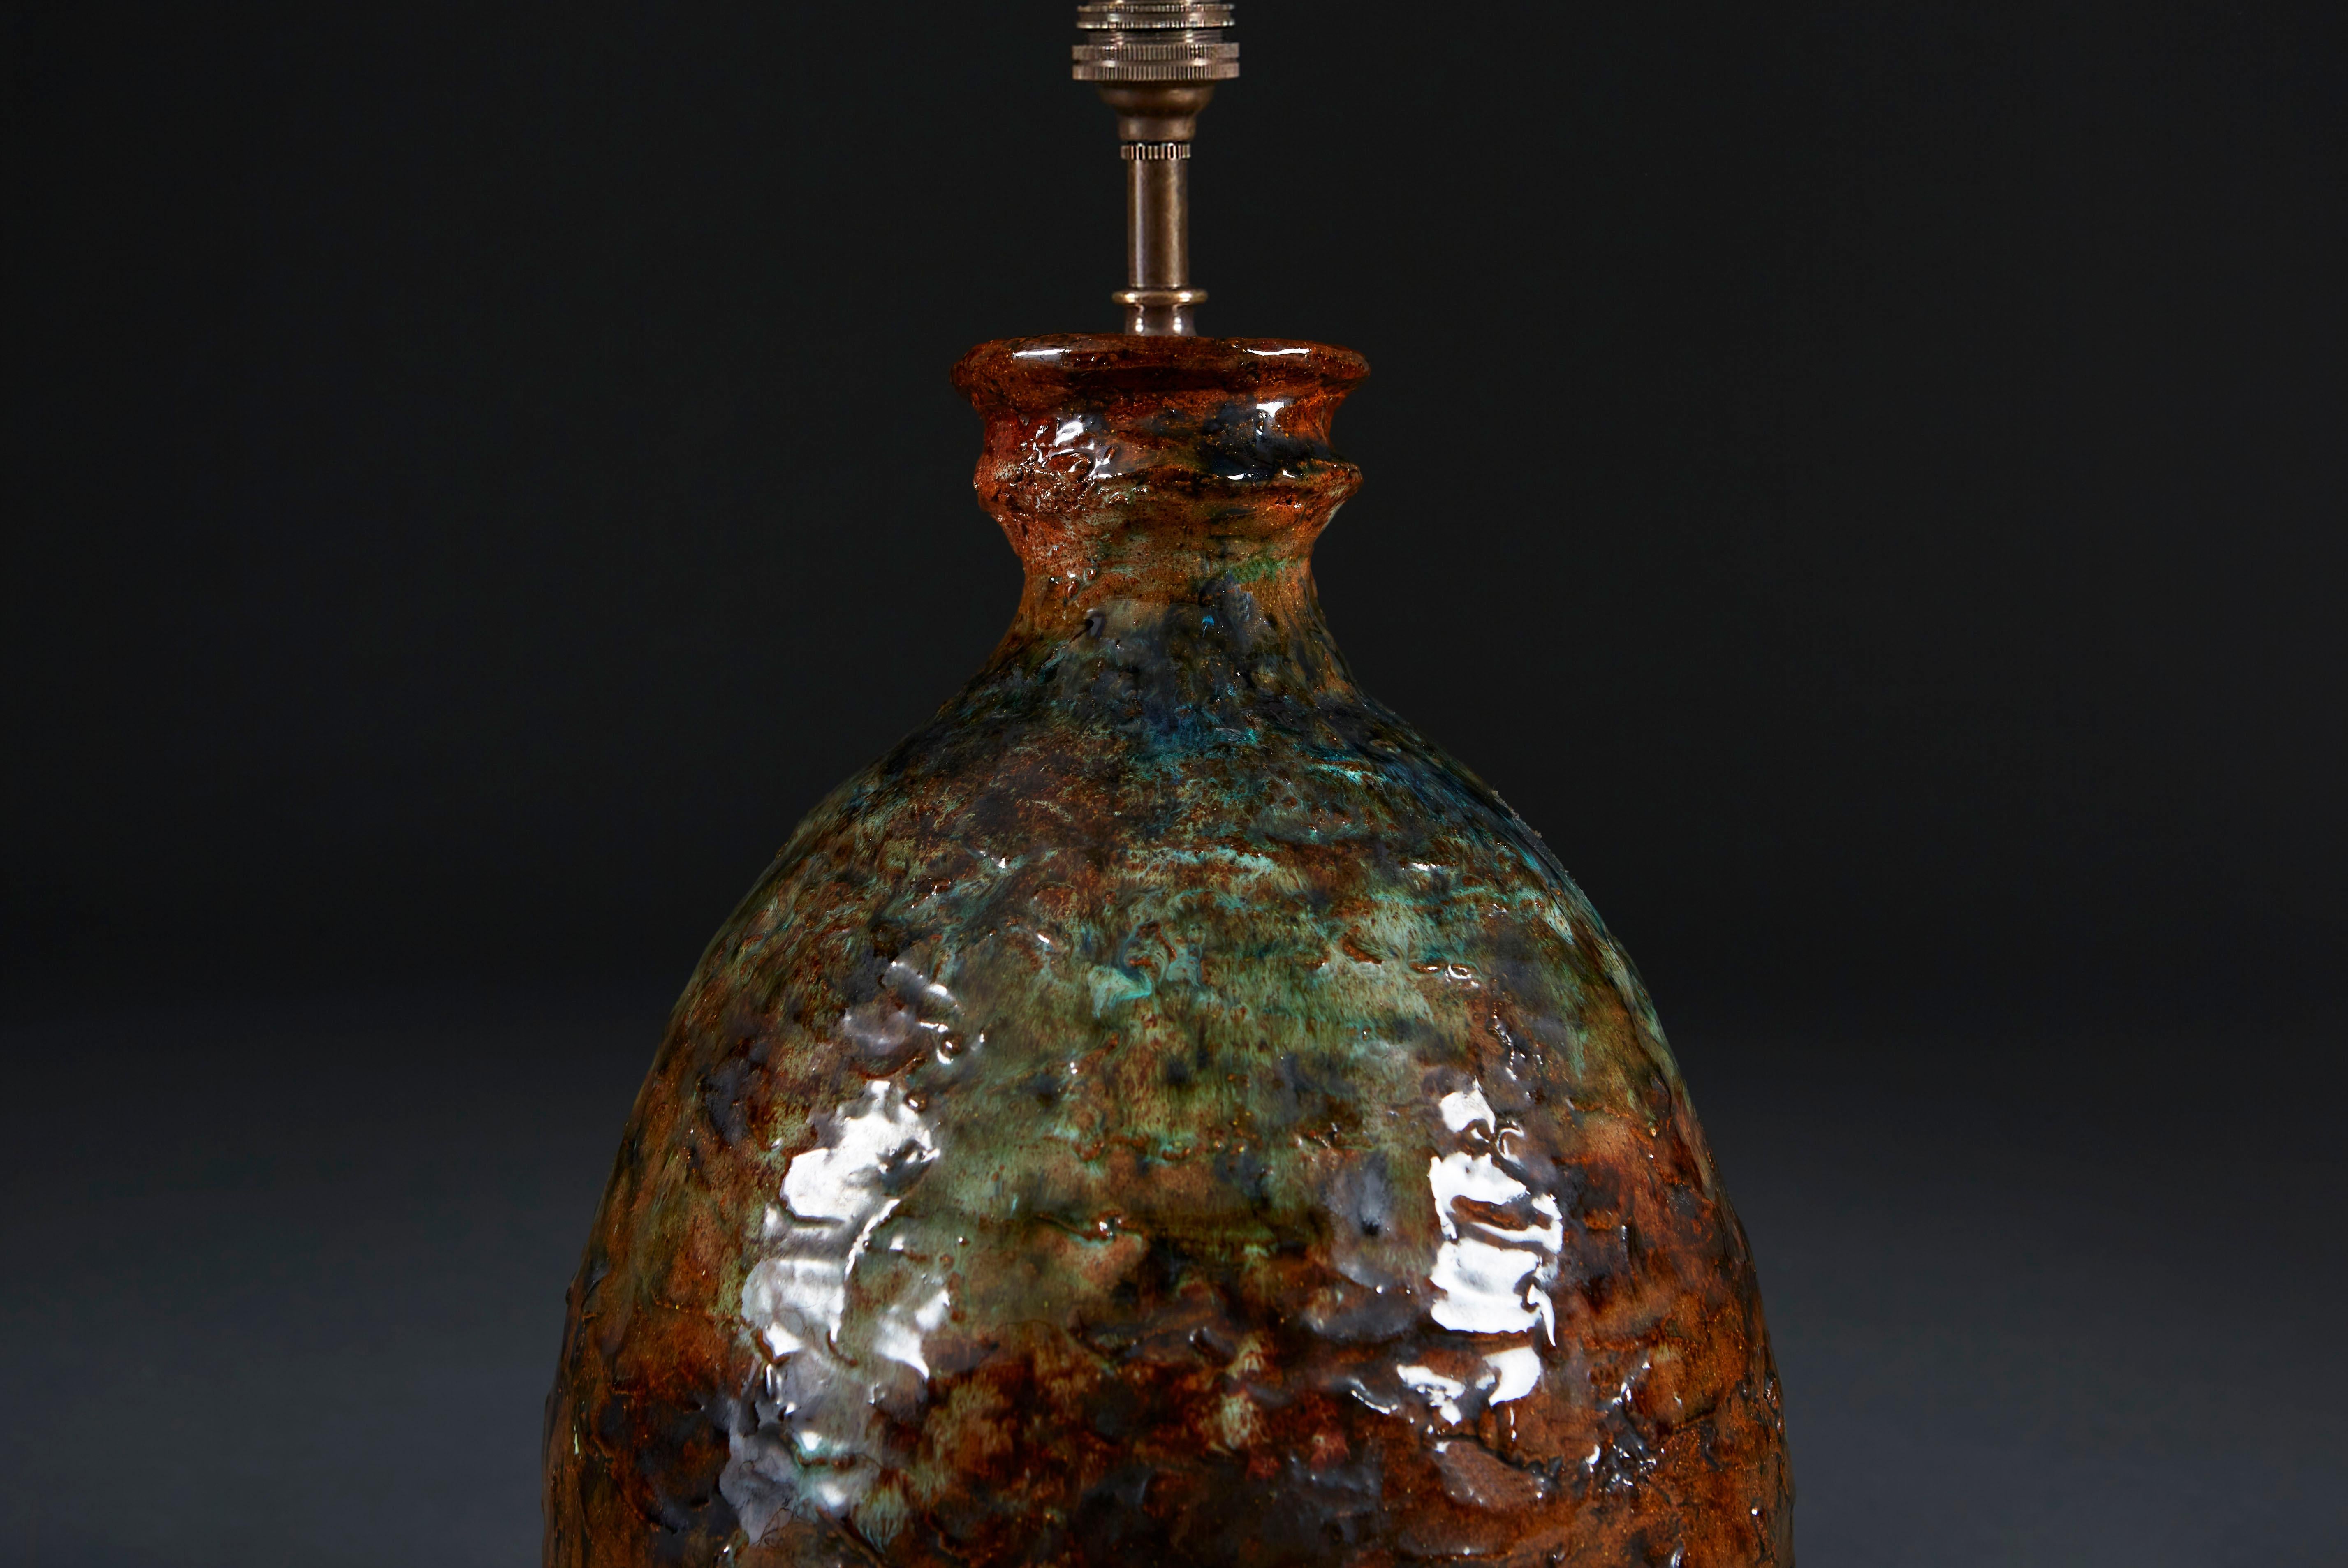 A mid-20th century art pottery vase with an unusual volcanic glaze of rust and green pigments, now converted as a lamp.

Please note: lampshade not included.

Currently wired for the UK.